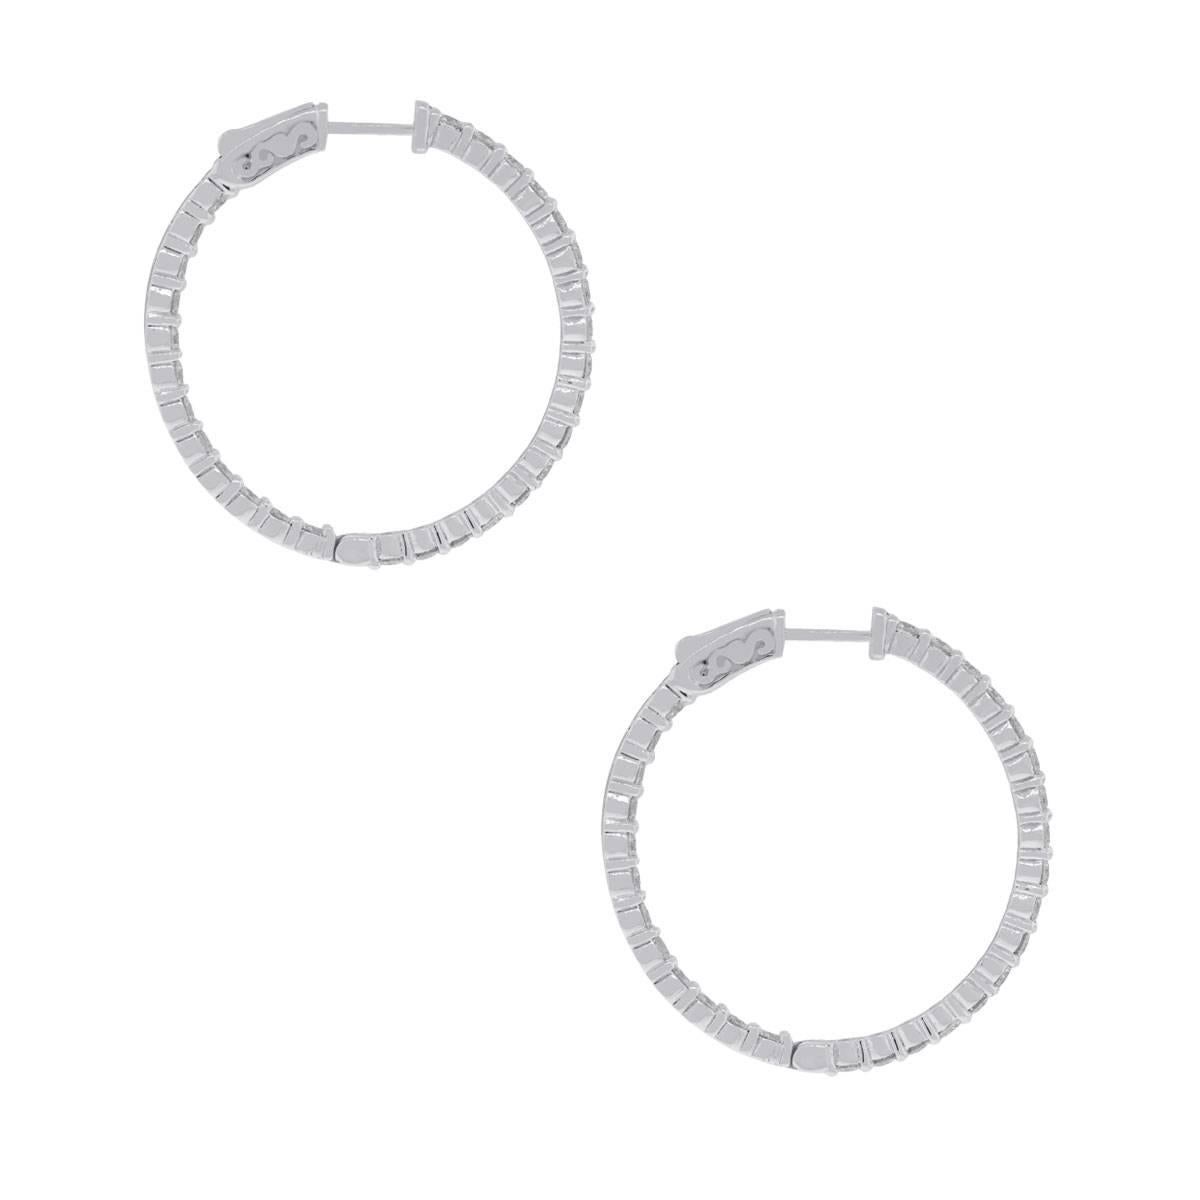 Material: 14k white gold
Style: Inside out diamond hoop earrings
Diamond Details: 58 round brilliant diamonds approximately 3.15ctw of round brilliant diamonds. Diamonds are G/H in color and VS in clarity.
Measurements: 1.40